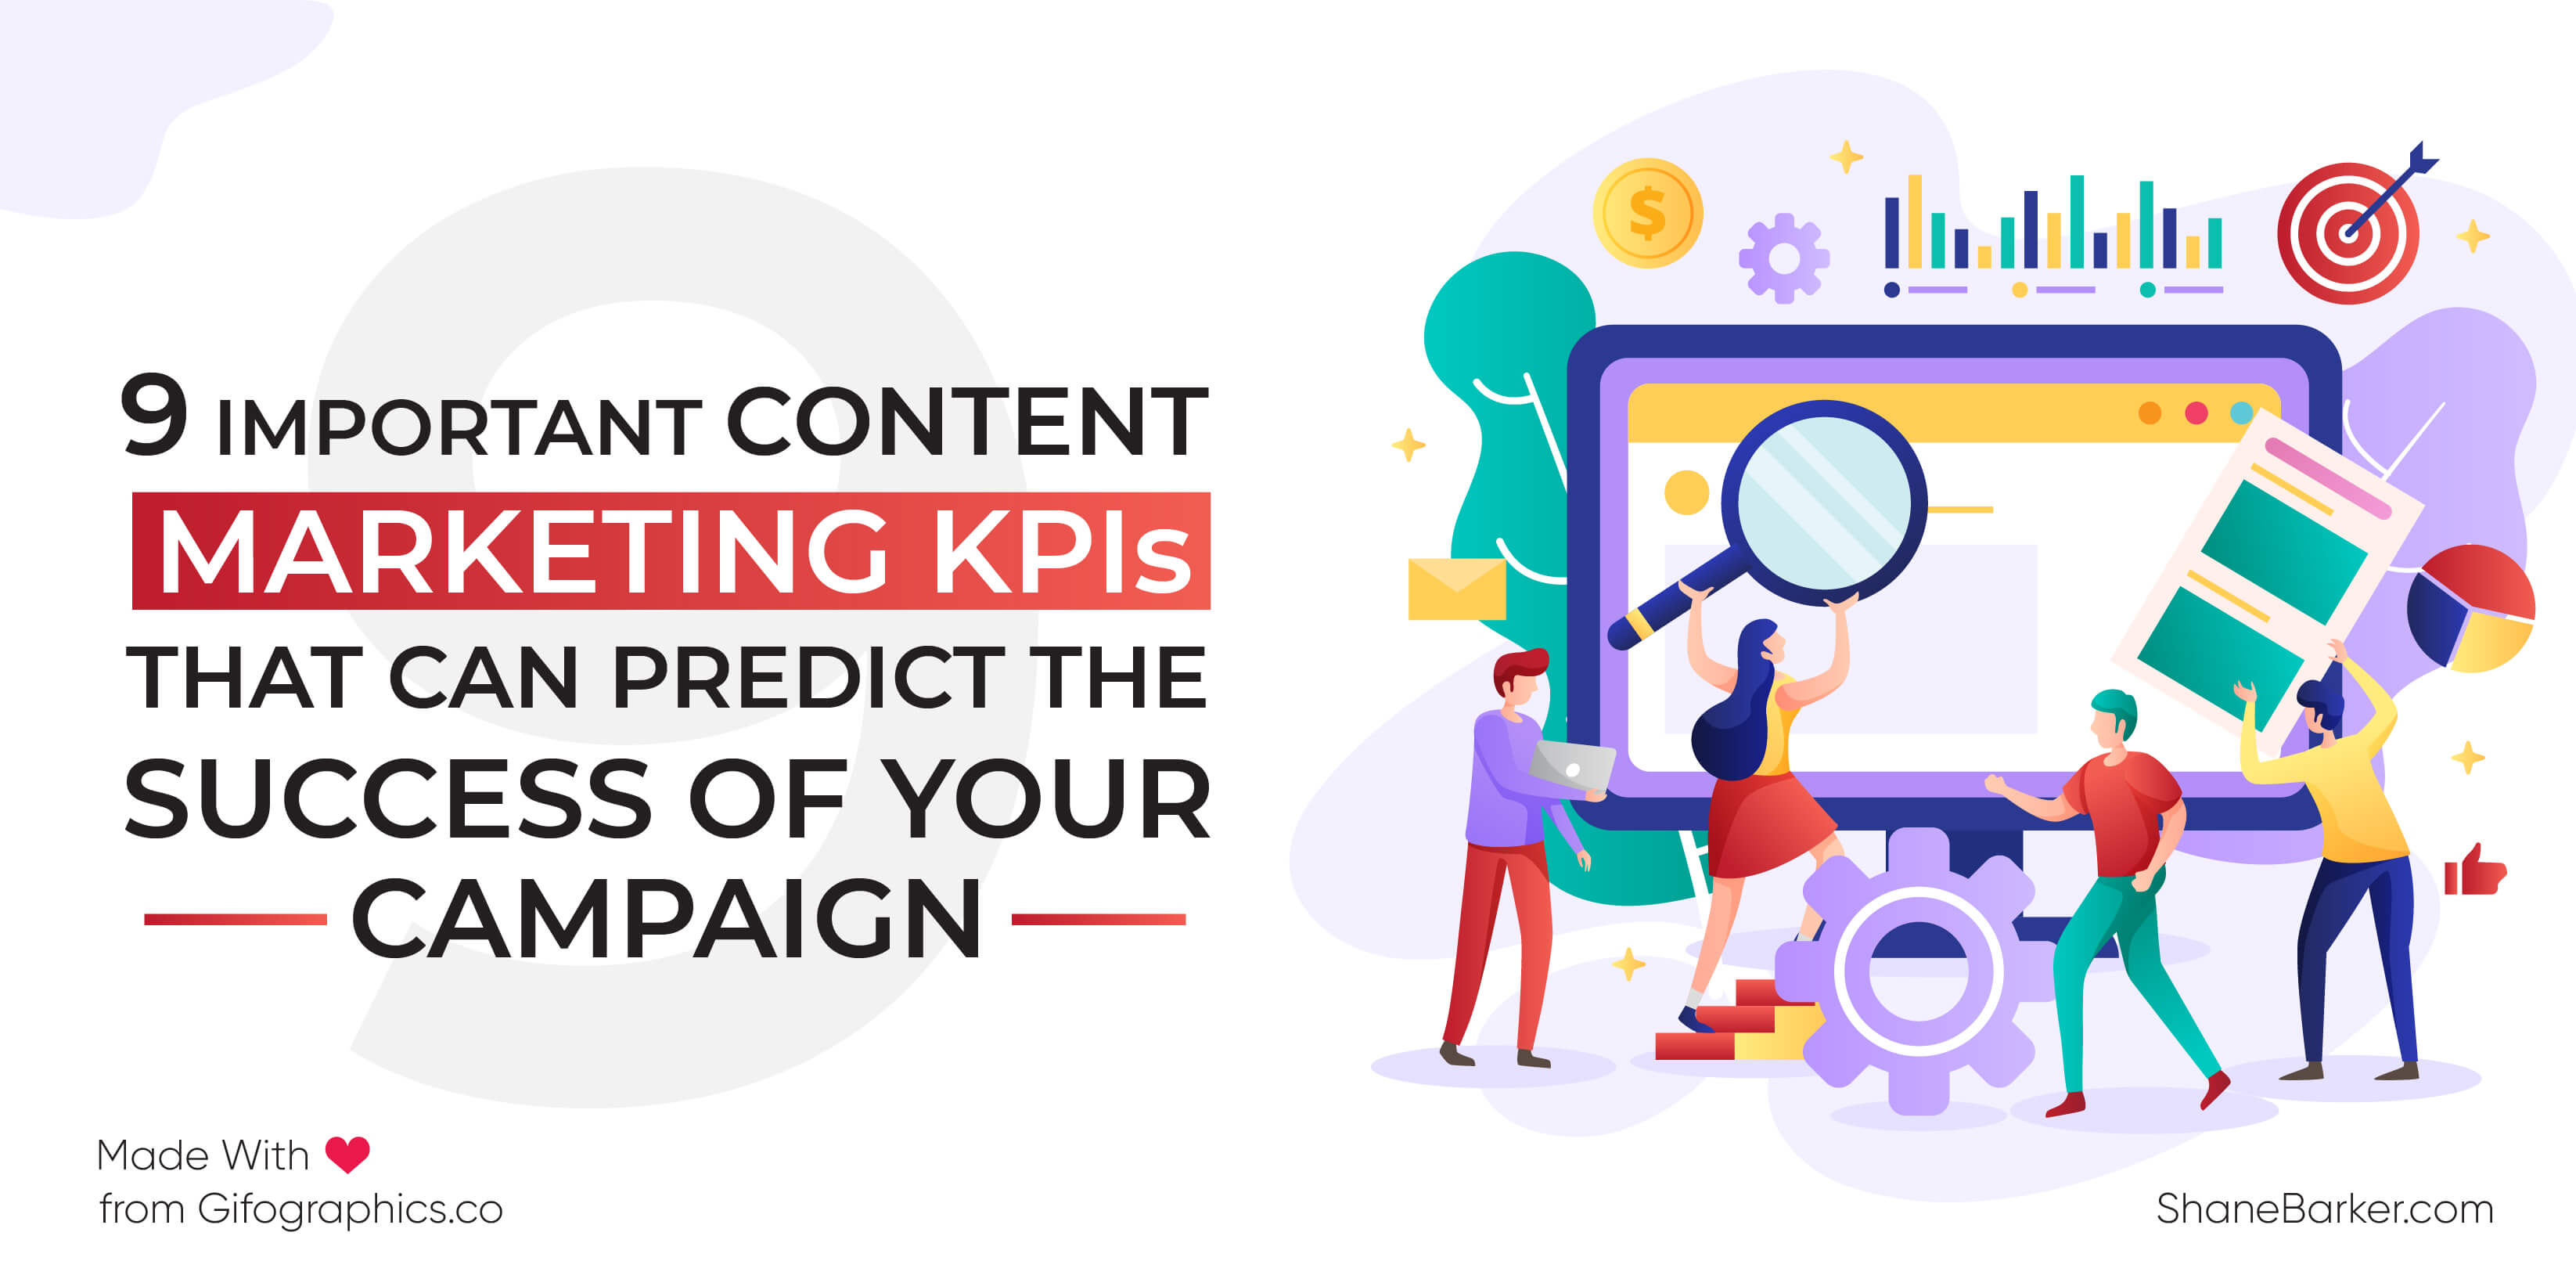 9 Important Content Marketing KPIs That Can Predict the Success of Your Campaign in 2022